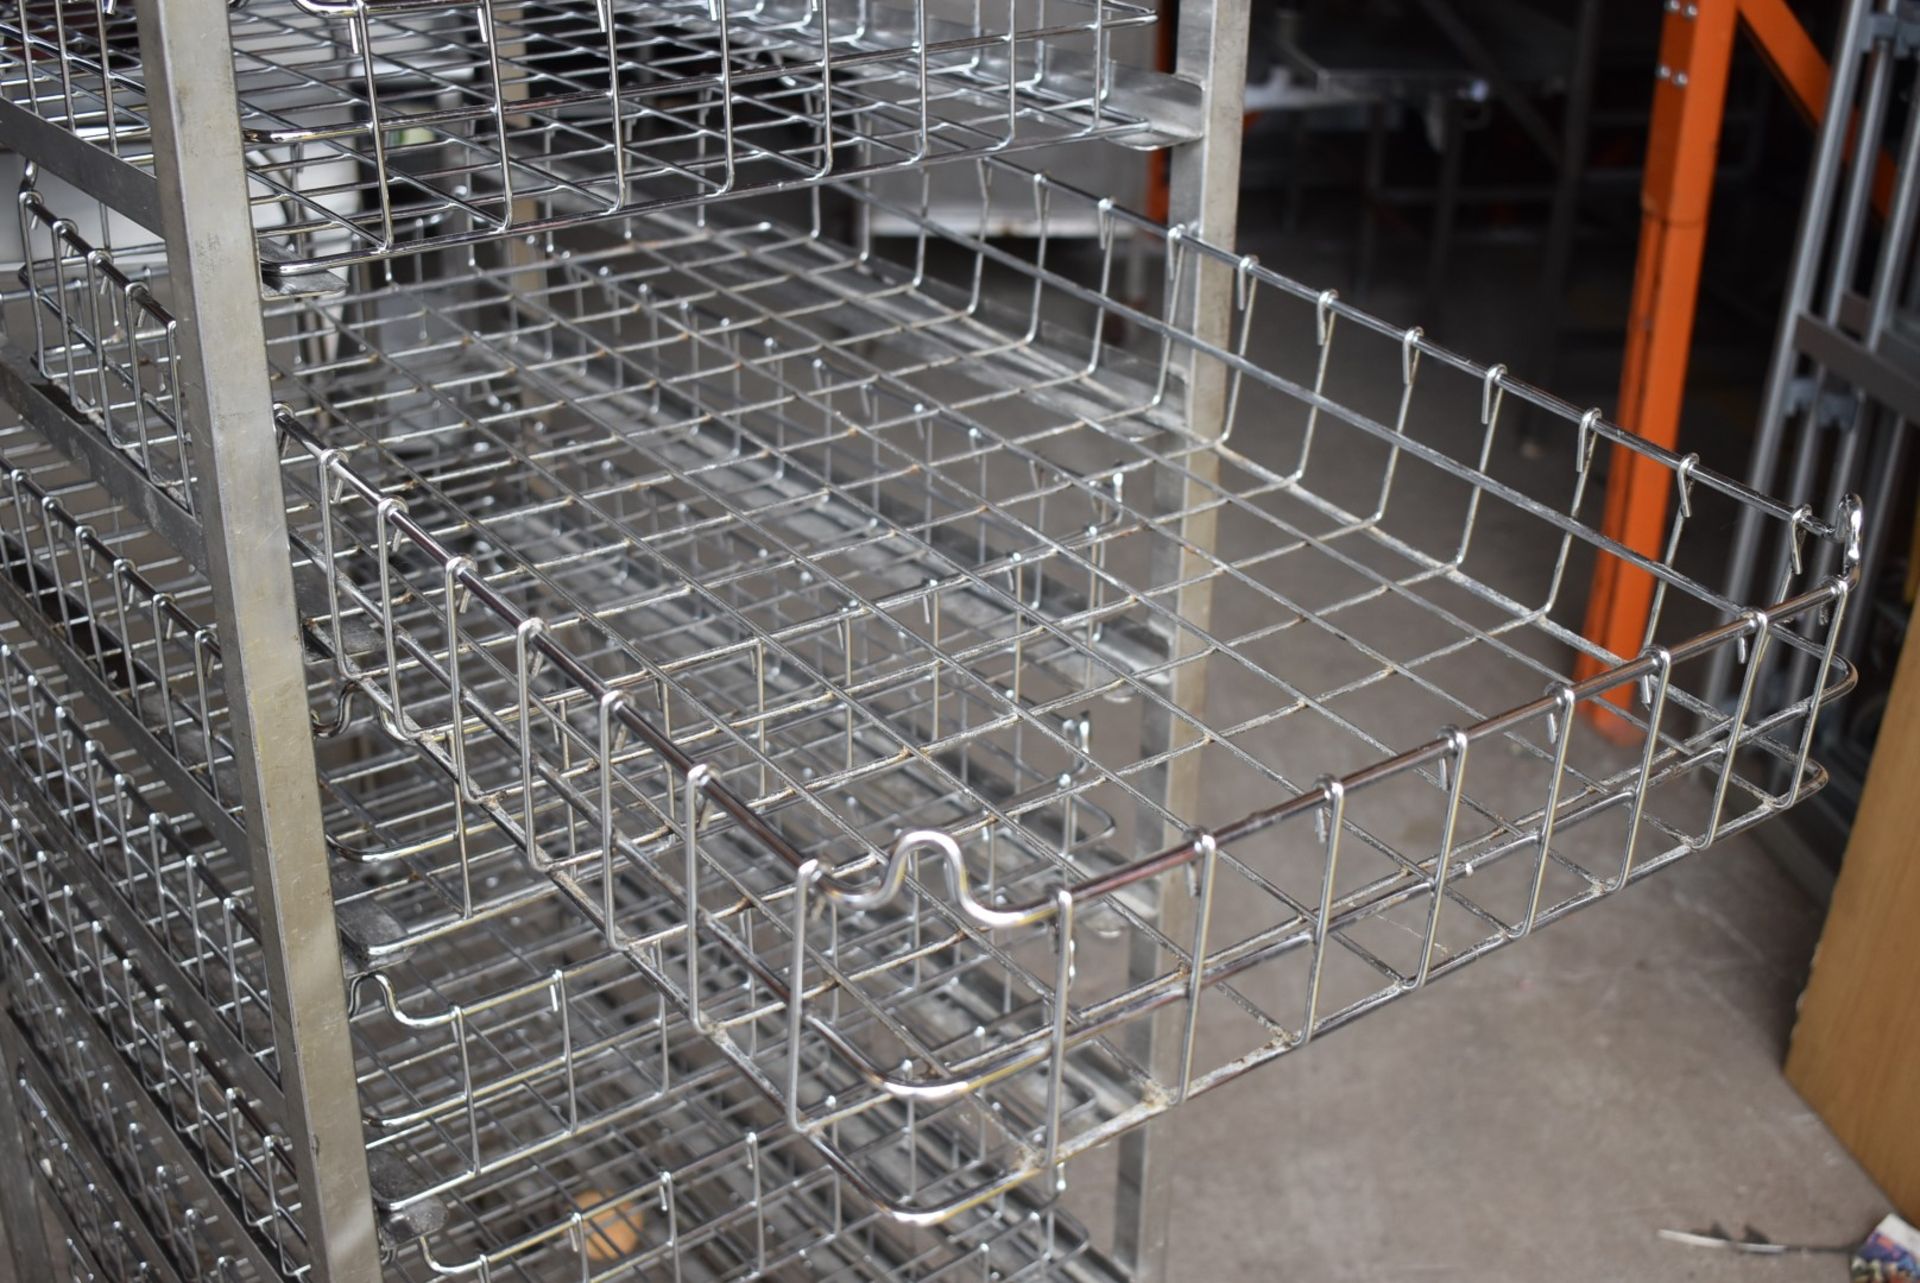 1 x Bakers 11 Tier Mobile Tray Rack With 8 Removable Wire Baskets - Stainless Steel With Castors - - Image 6 of 6